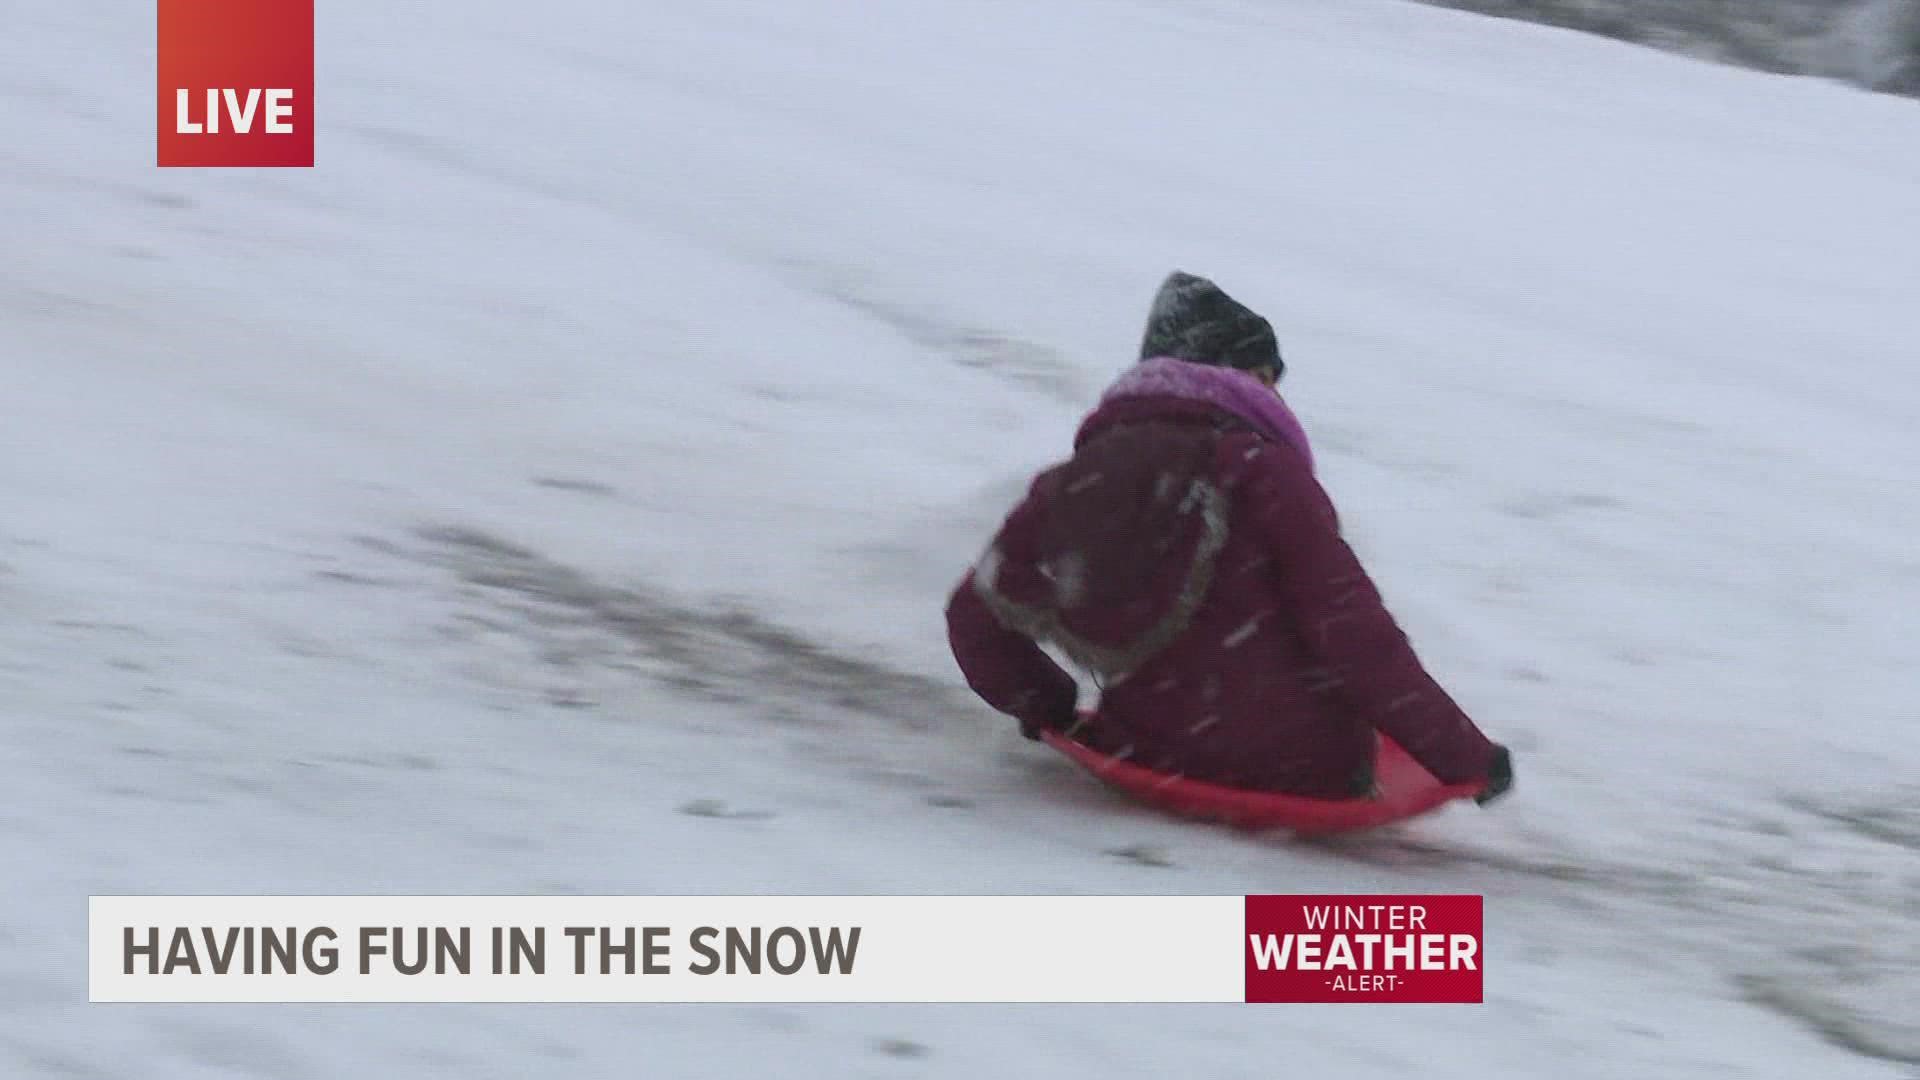 A lot of schools canceled classes today allowing children and adults to spend time playing in the snow. Our own reporter Carla Bayron had the best assignment today!